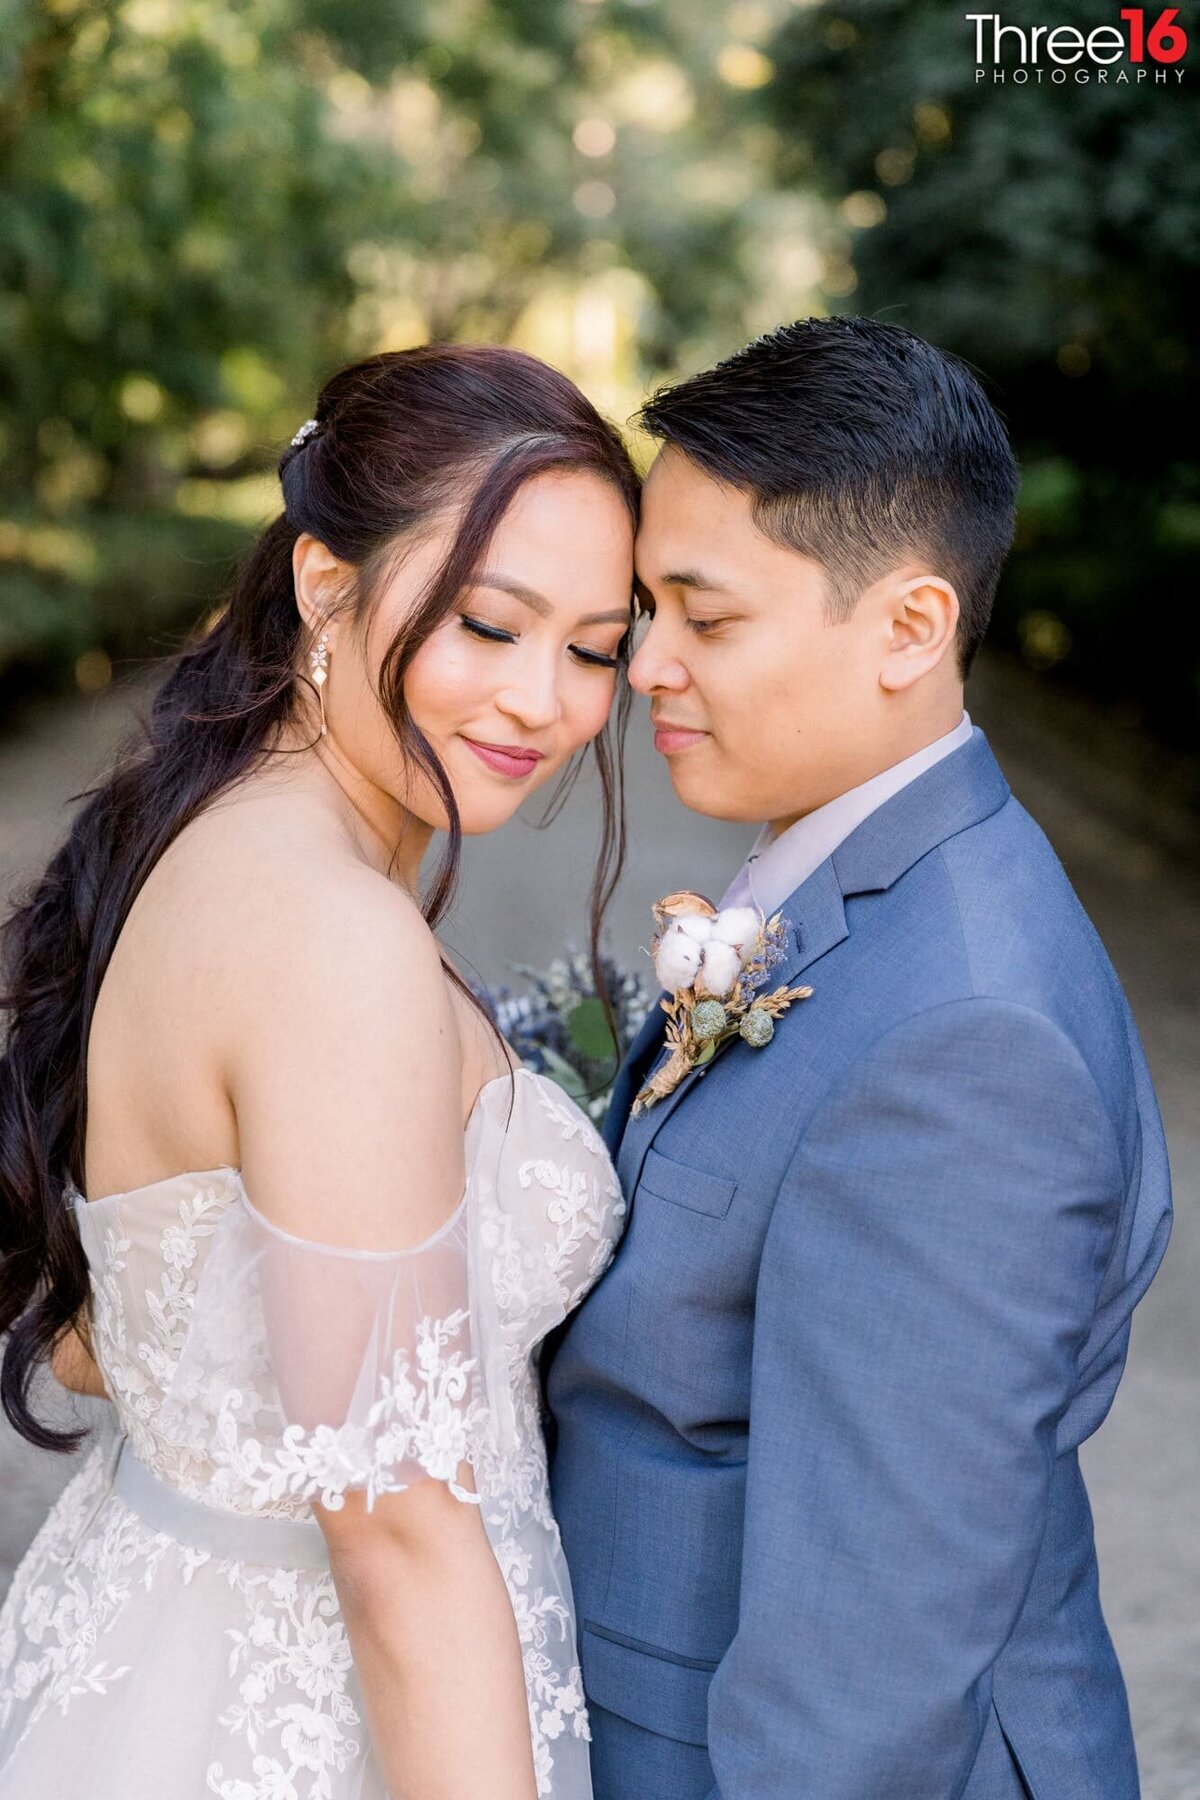 Tender moment for newly married couple during their photo session